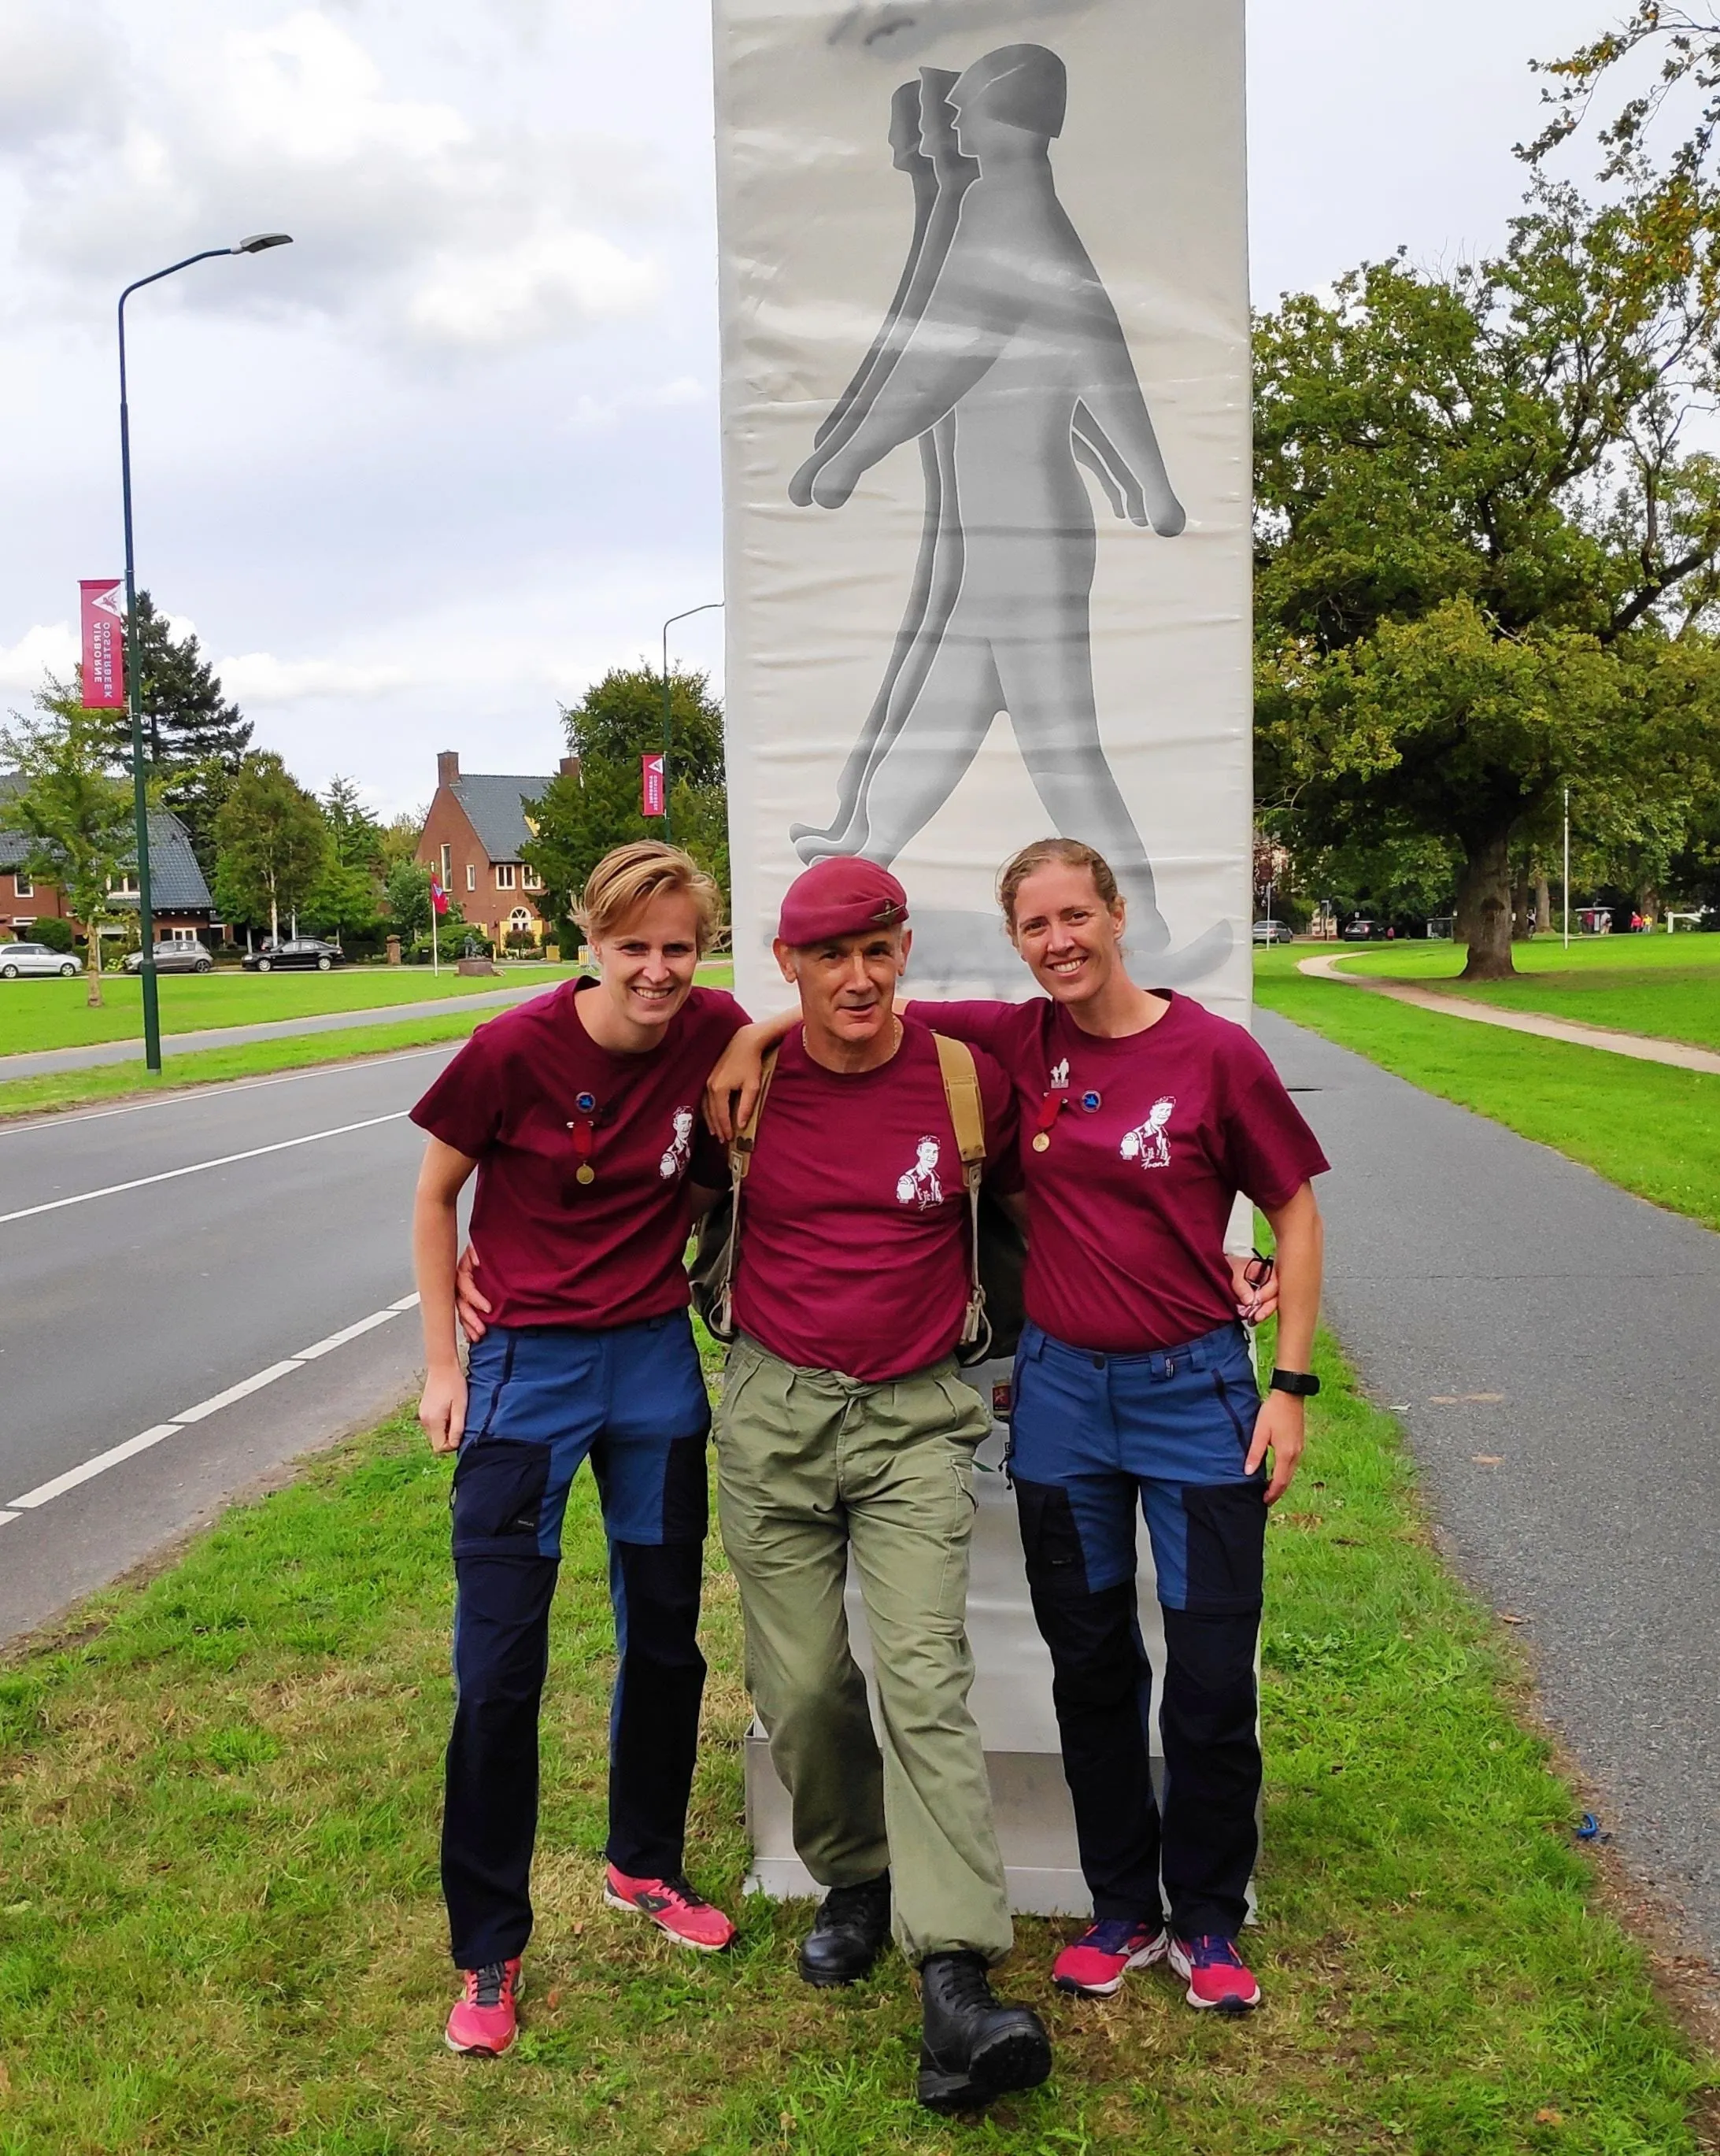 chris at wandeltocht with anne and eveline september 2020